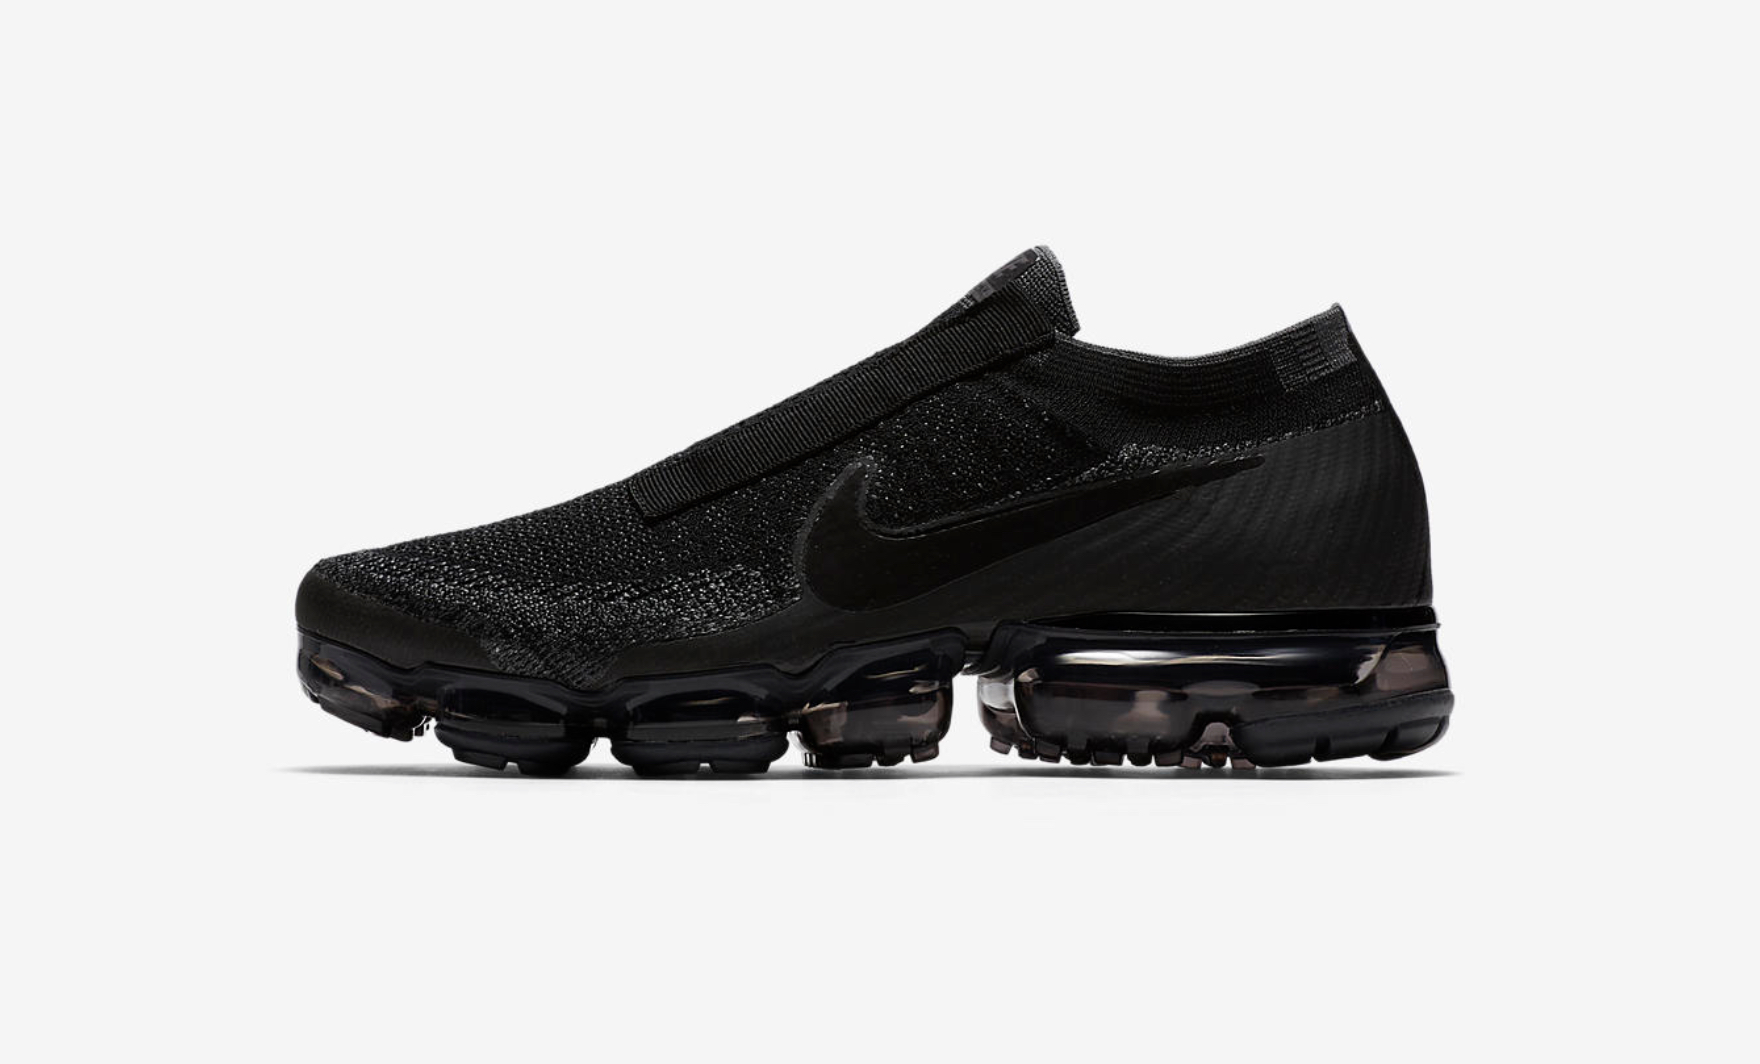 Two Laceless Air VaporMax Builds are Releasing in Japan - WearTesters